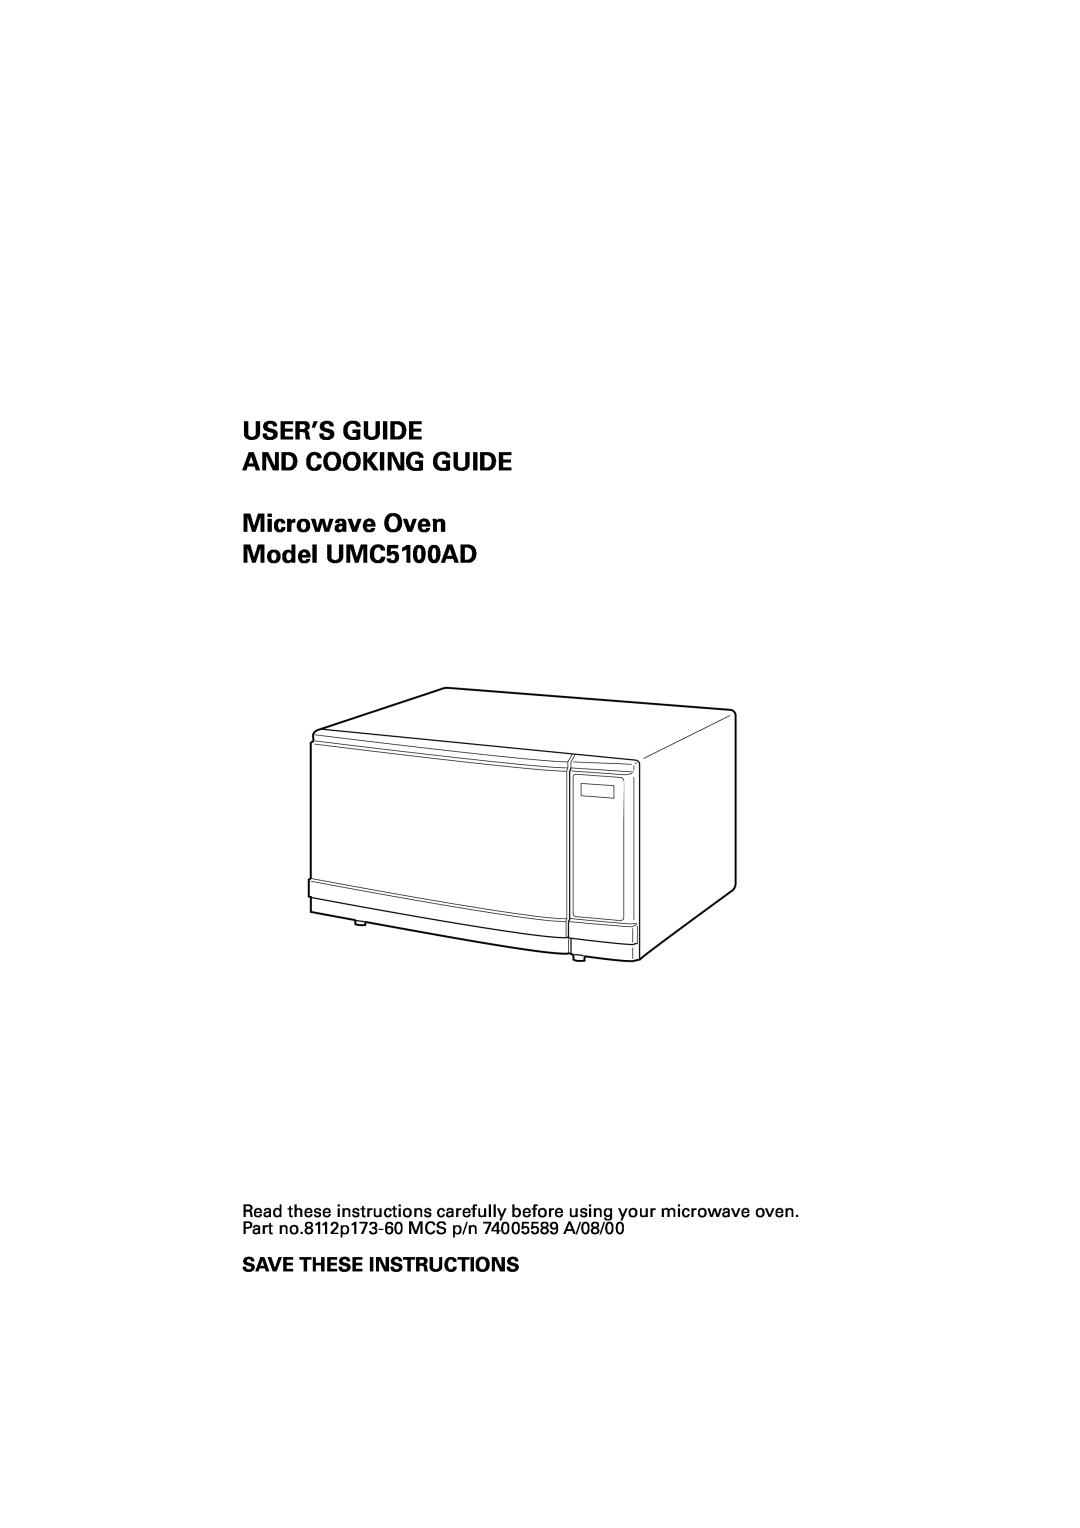 Maytag manual Save These Instructions, USER’S GUIDE AND COOKING GUIDE Microwave Oven, Model UMC5100AD 